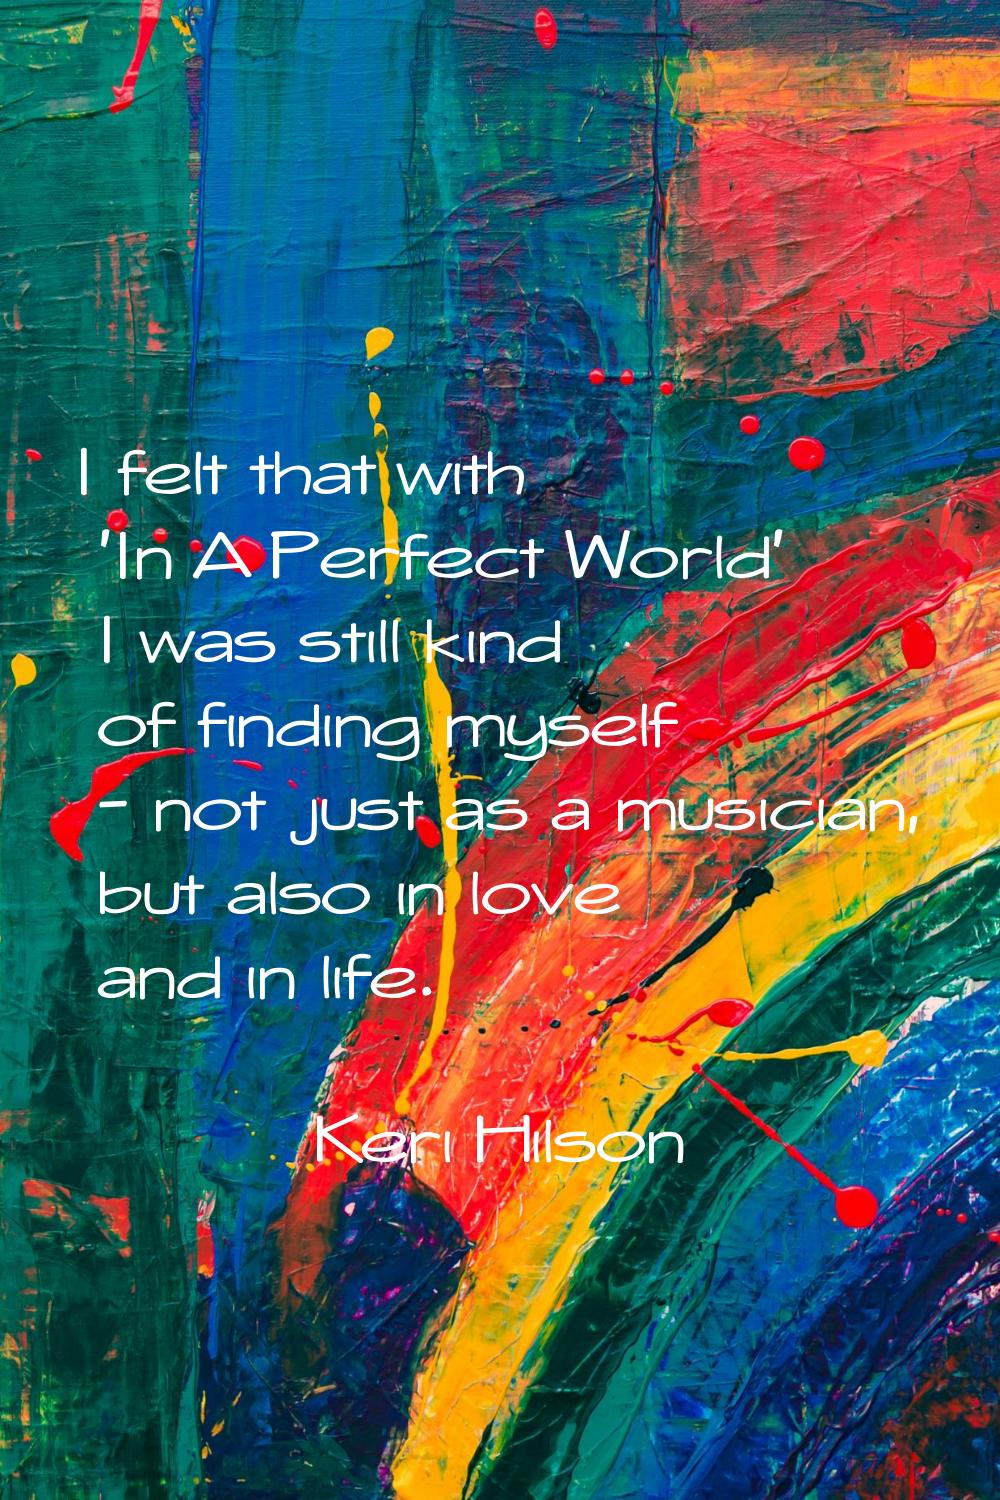 I felt that with 'In A Perfect World' I was still kind of finding myself - not just as a musician, 